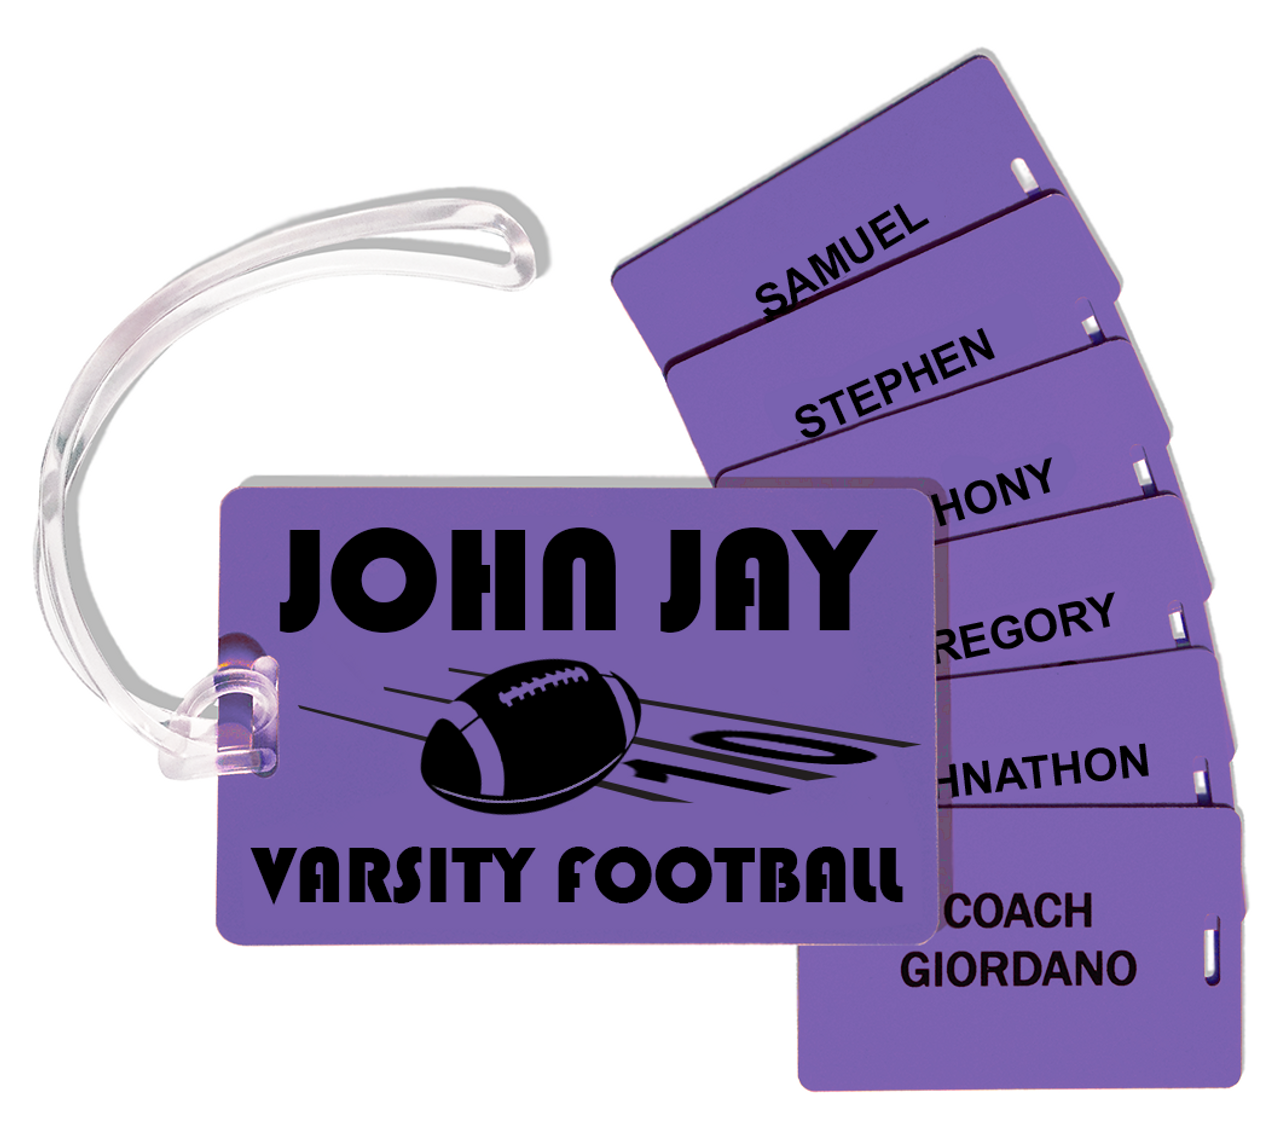 Bag and Player Tags - with mail merge option adding players' names